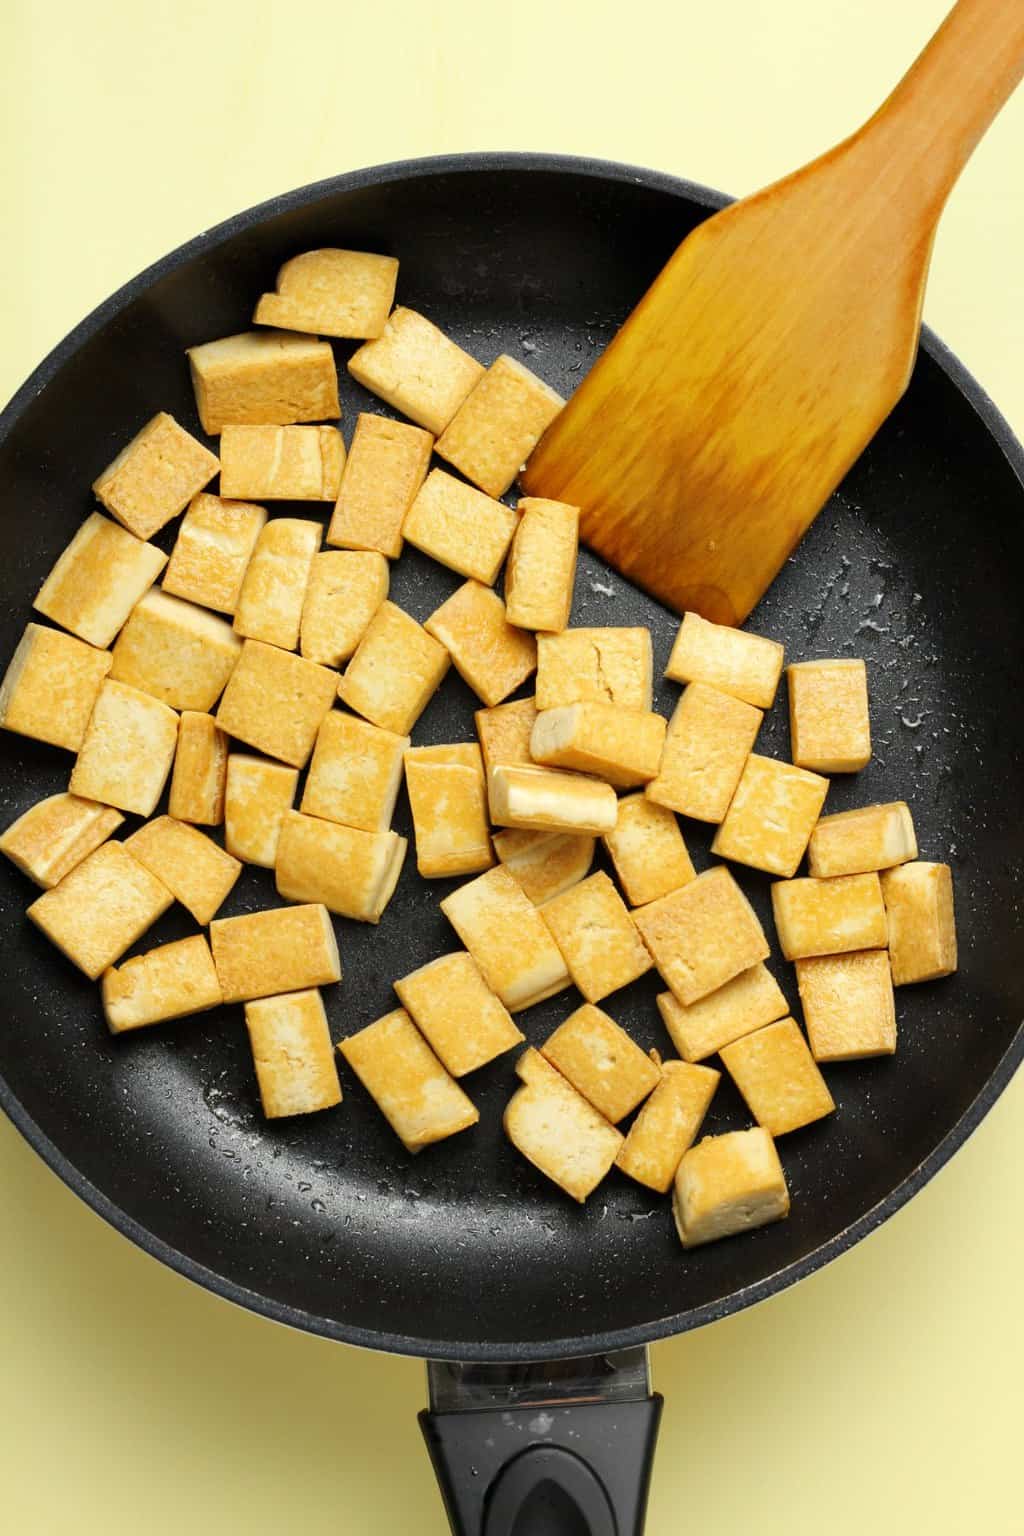 Cubes of fried tofu in a frying pan with a wooden spatula.